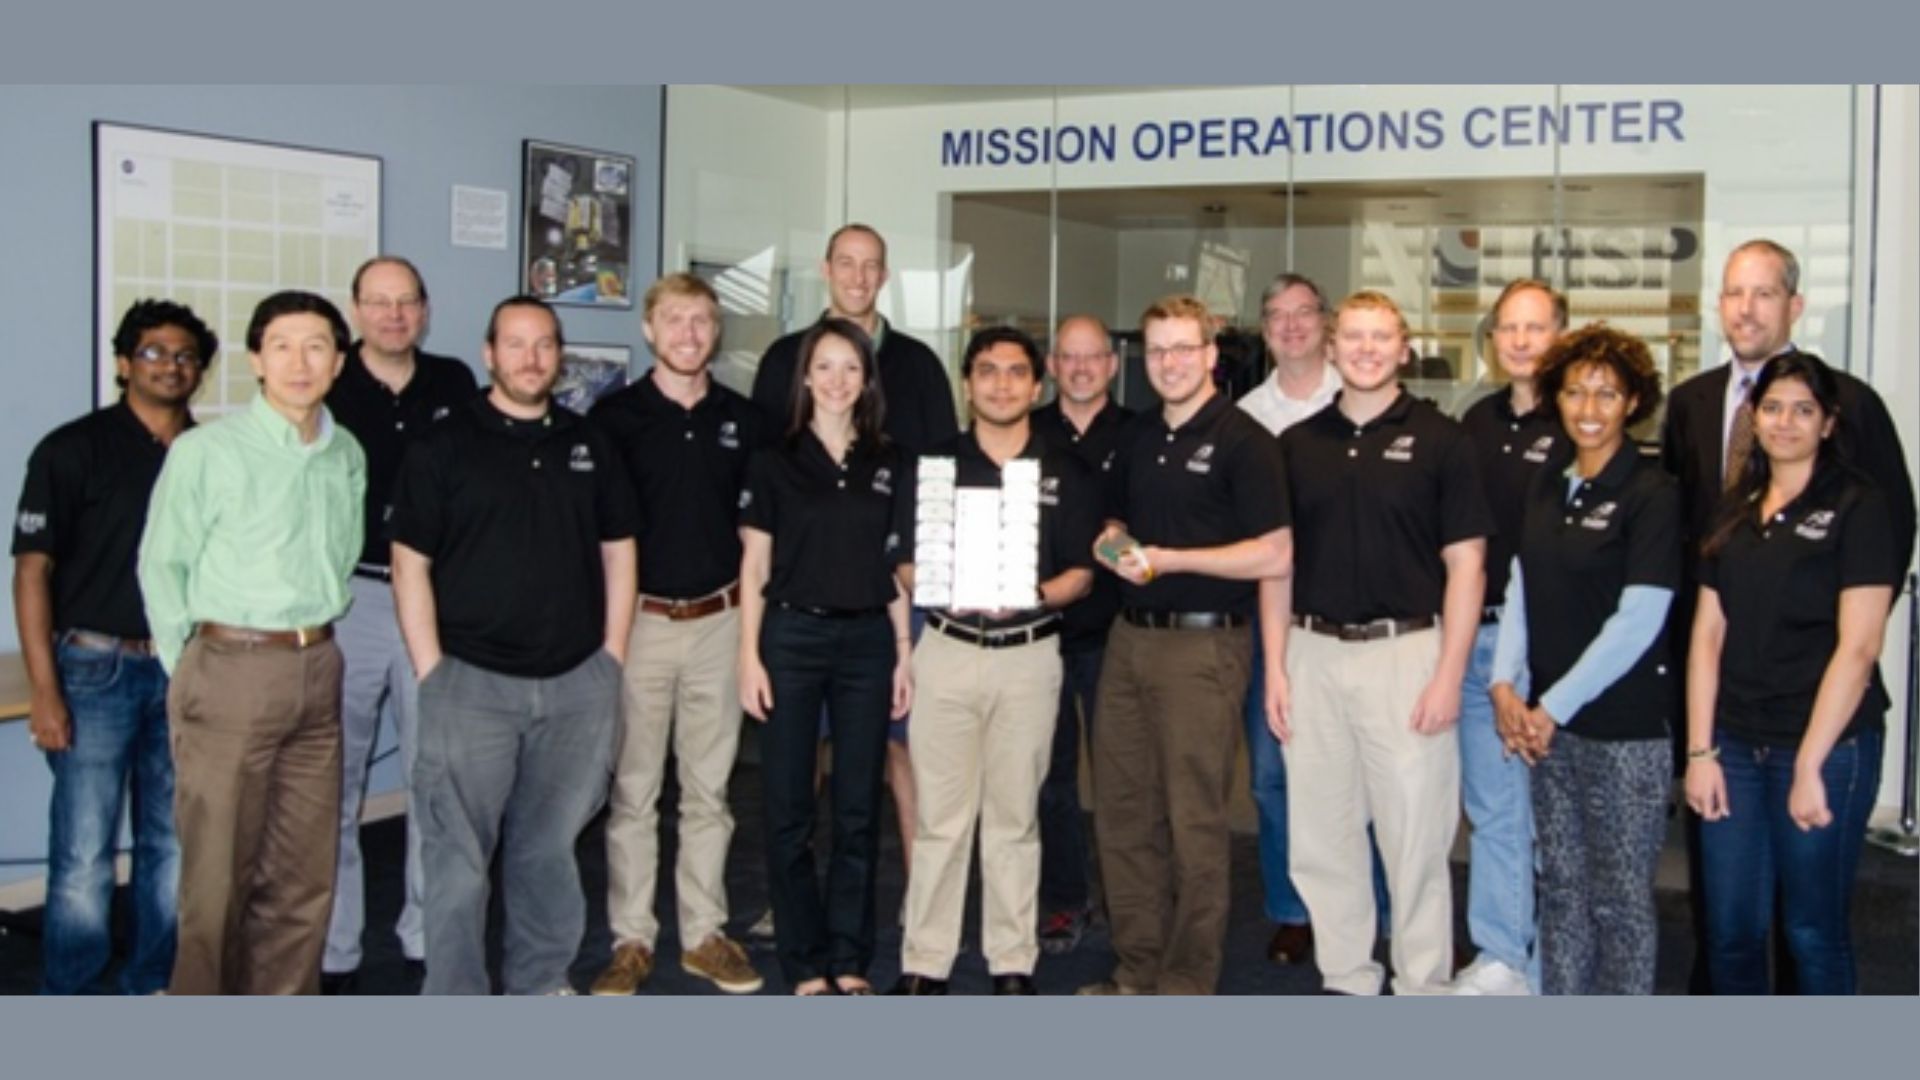 The Miniature X-ray Solar Spectrometer (MinXSS) team in April 2014 prior to the launch of MinXSS-1. The 4-year project to design, build, integrate, test, and operate a small satellite to be launched into low-Earth orbit to take observations of the sun involved many students. Credit: LASP